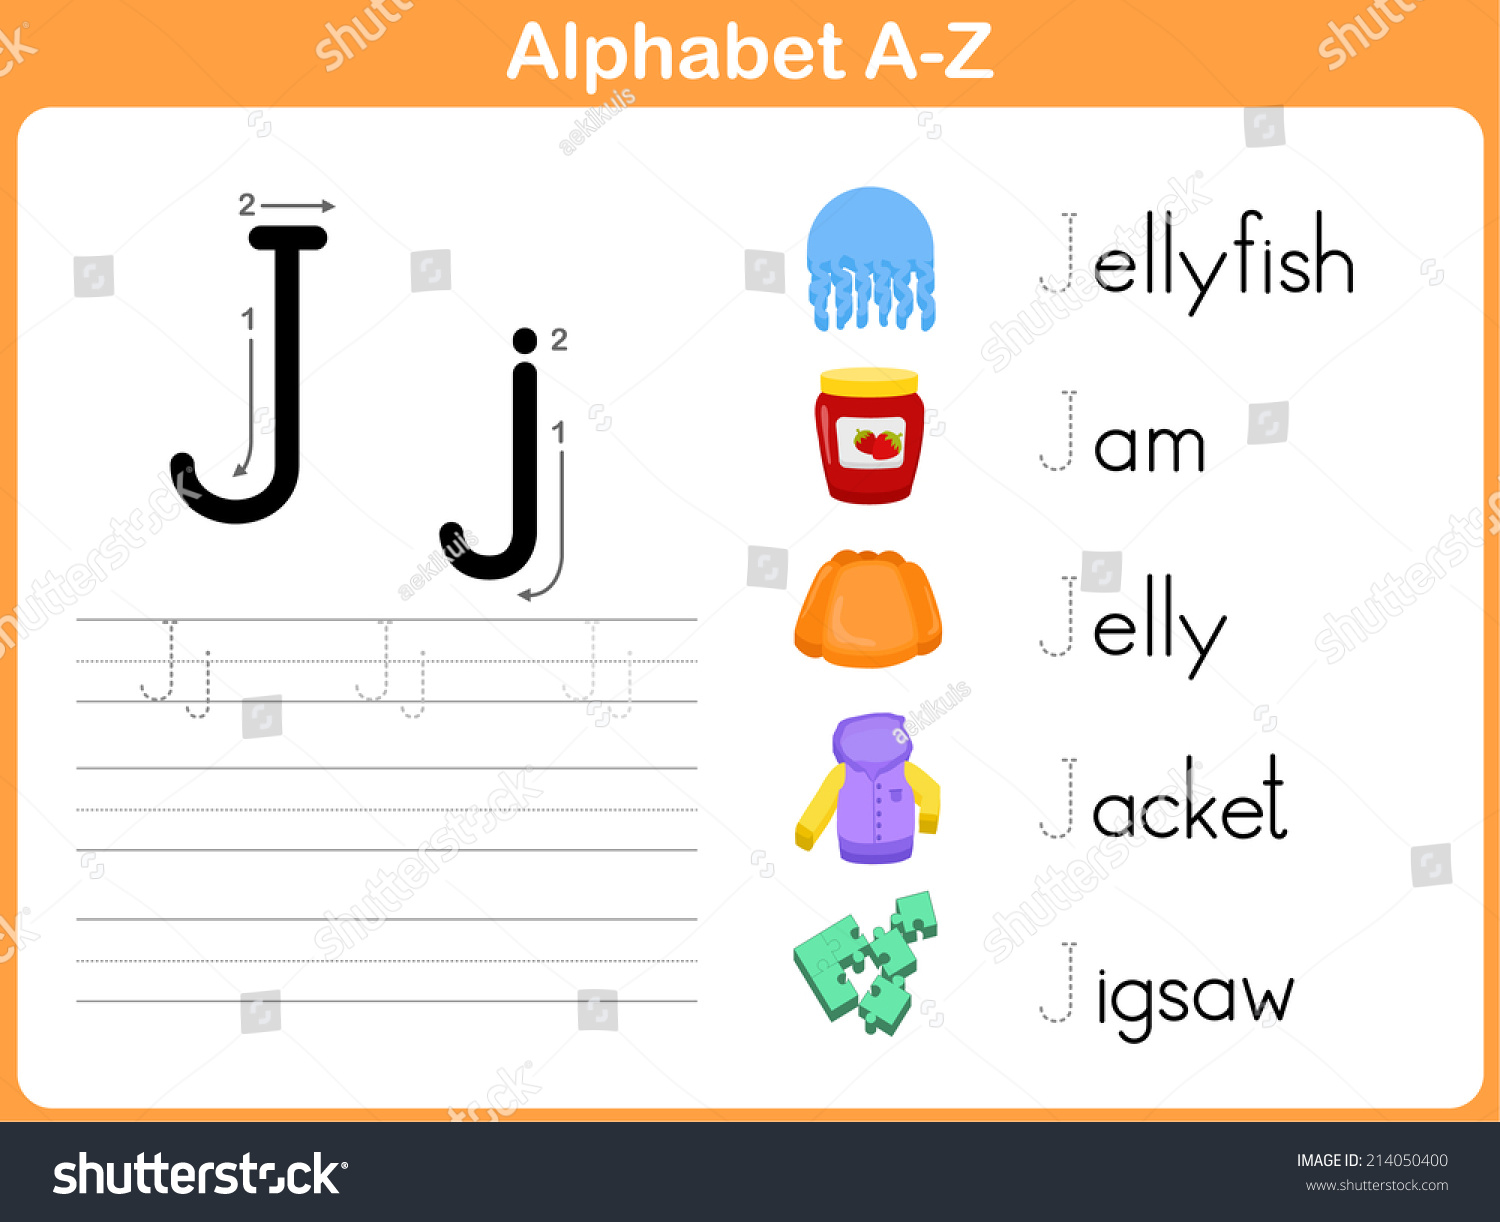 Alphabet Tracing Worksheet Writing Az Stock Vector 214050400  worksheets for teachers, printable worksheets, multiplication, free worksheets, and math worksheets Tracing Letters A Z Worksheet 1222 x 1500